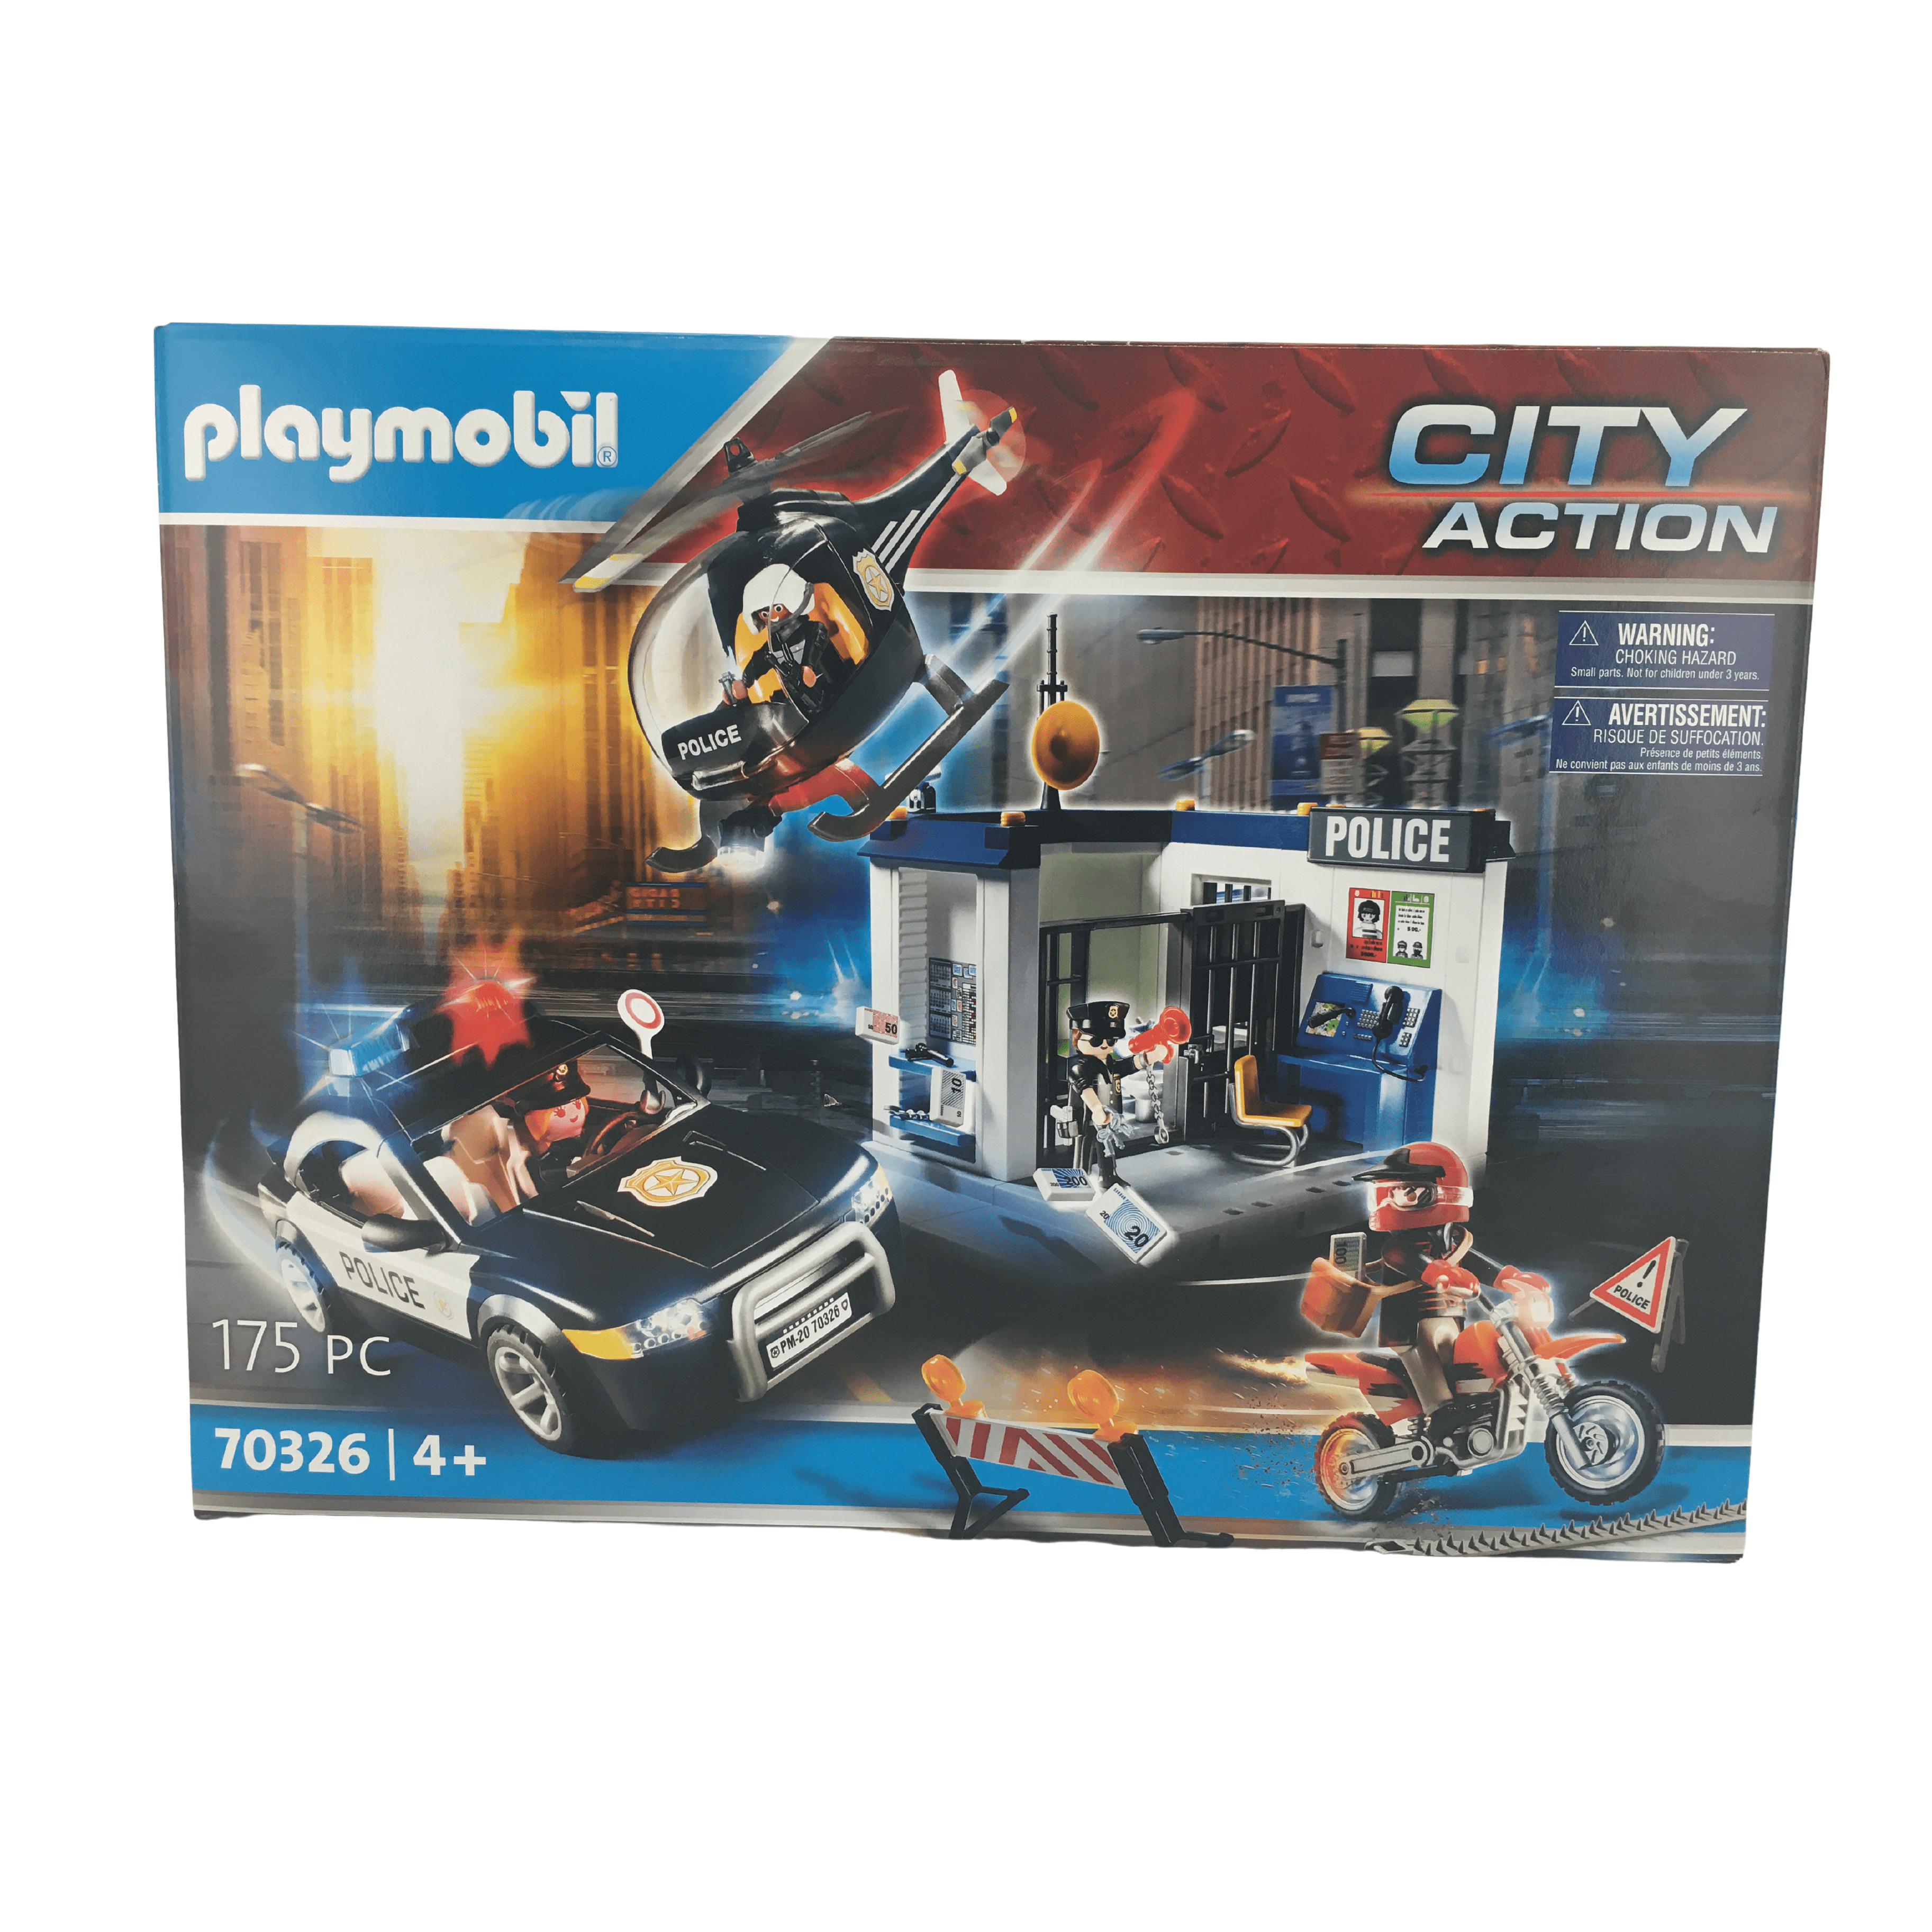 Playmobile City Action Playset Police Station with Jail, Helicopter, Police Car and Robber